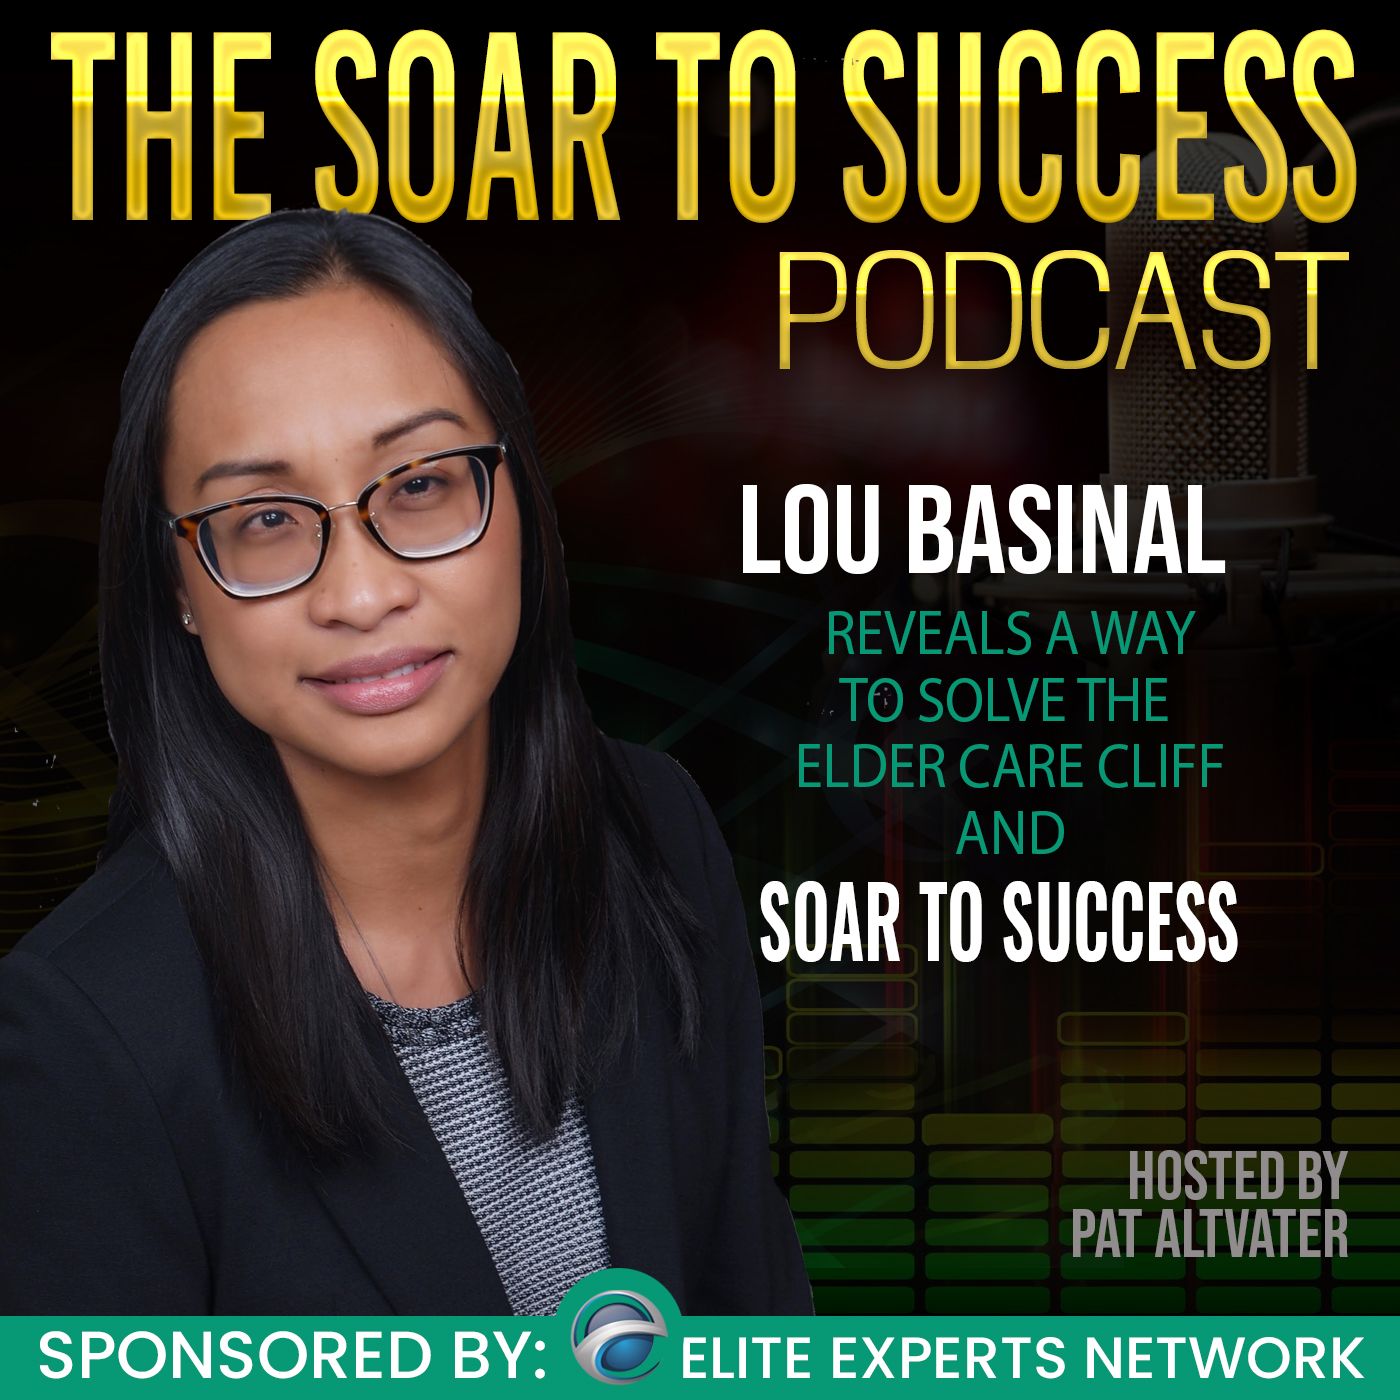 Lou Basinal Works to Solve the Elder-Care Crisis in Corporate America